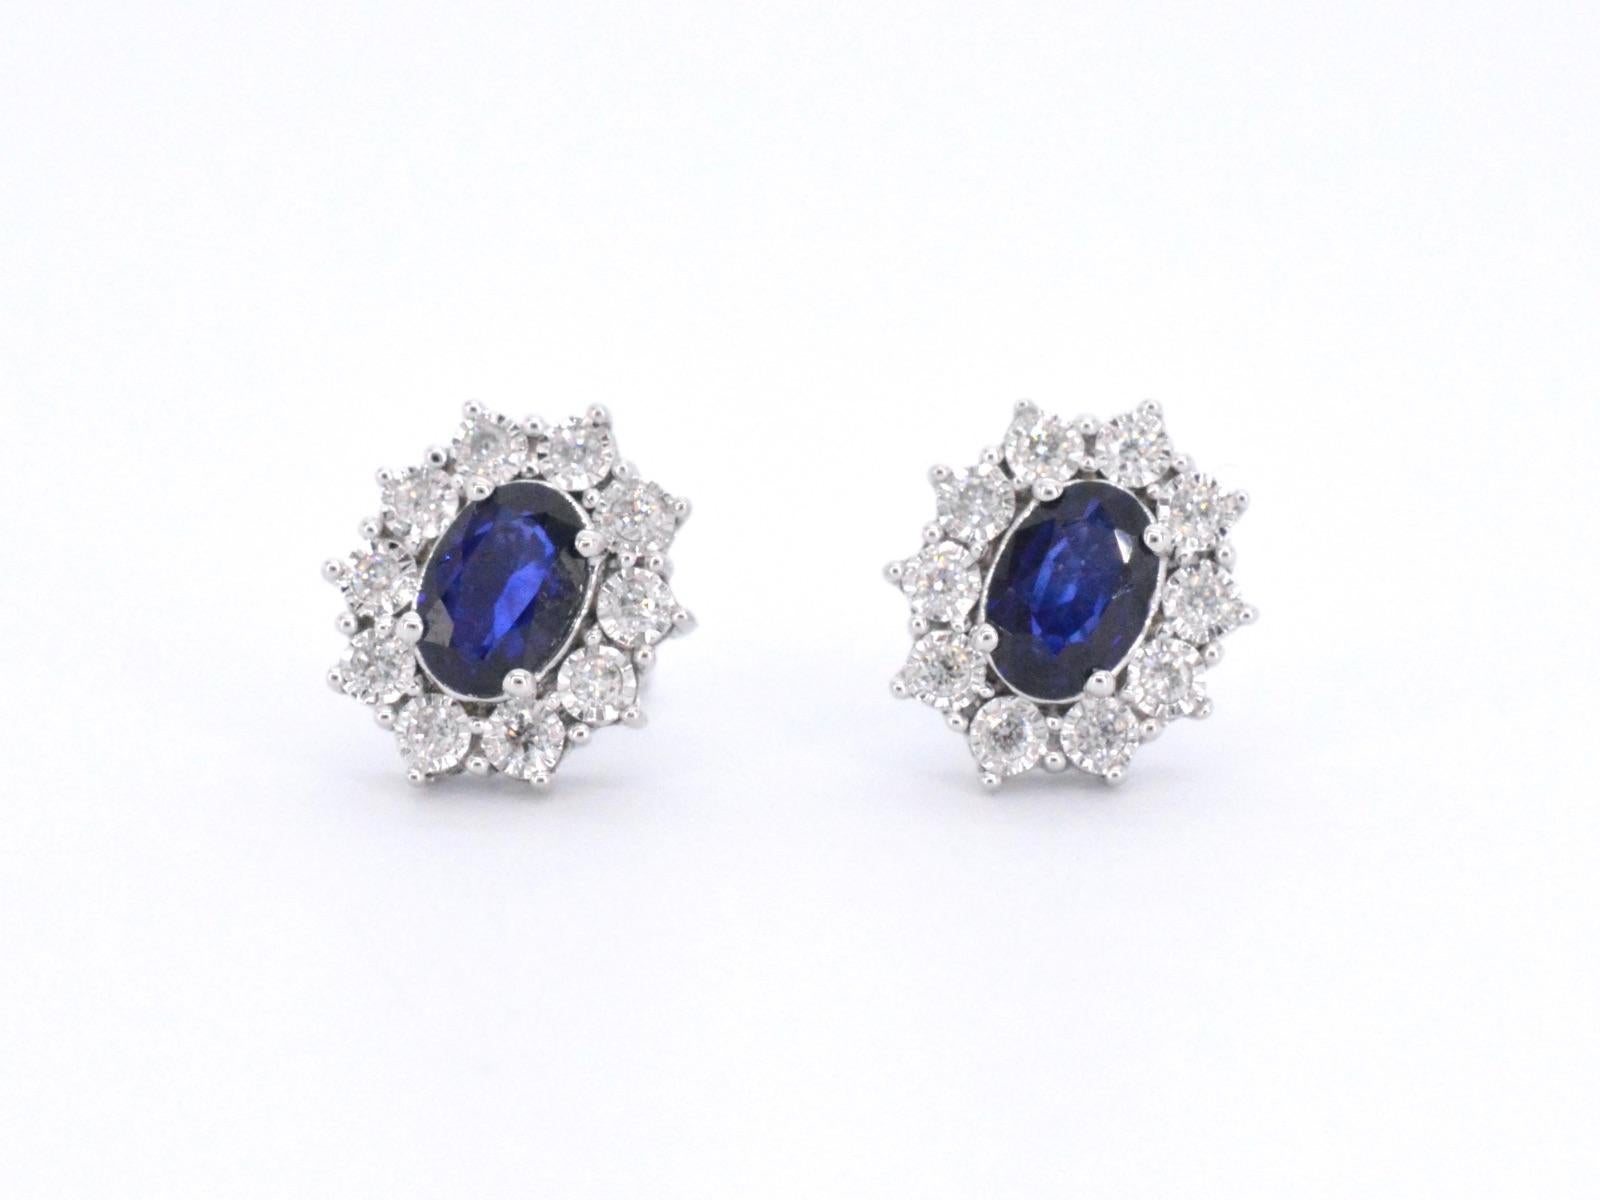 Women's White Gold Earrings with Diamonds and Sapphire For Sale